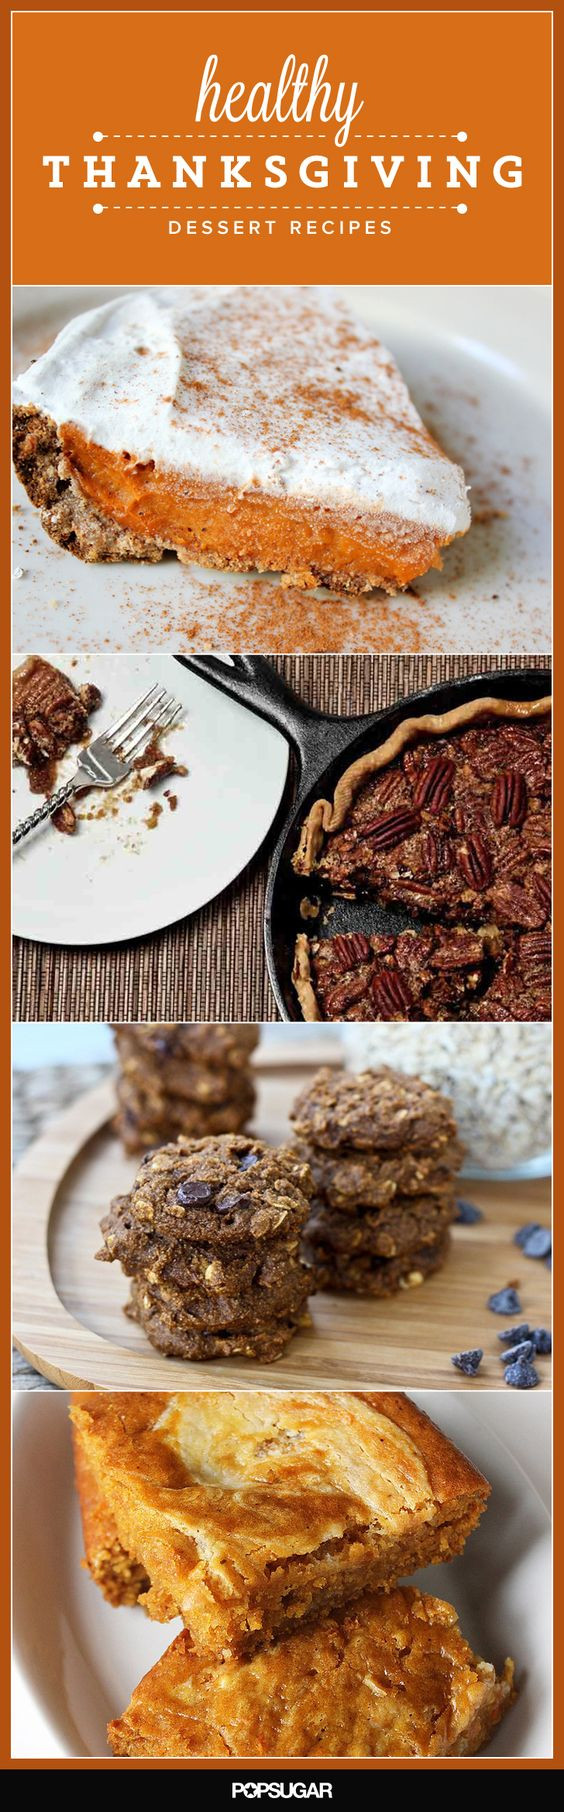 Healthy Thanksgiving Desserts
 20 Healthy Desserts For Your Thanksgiving Feast